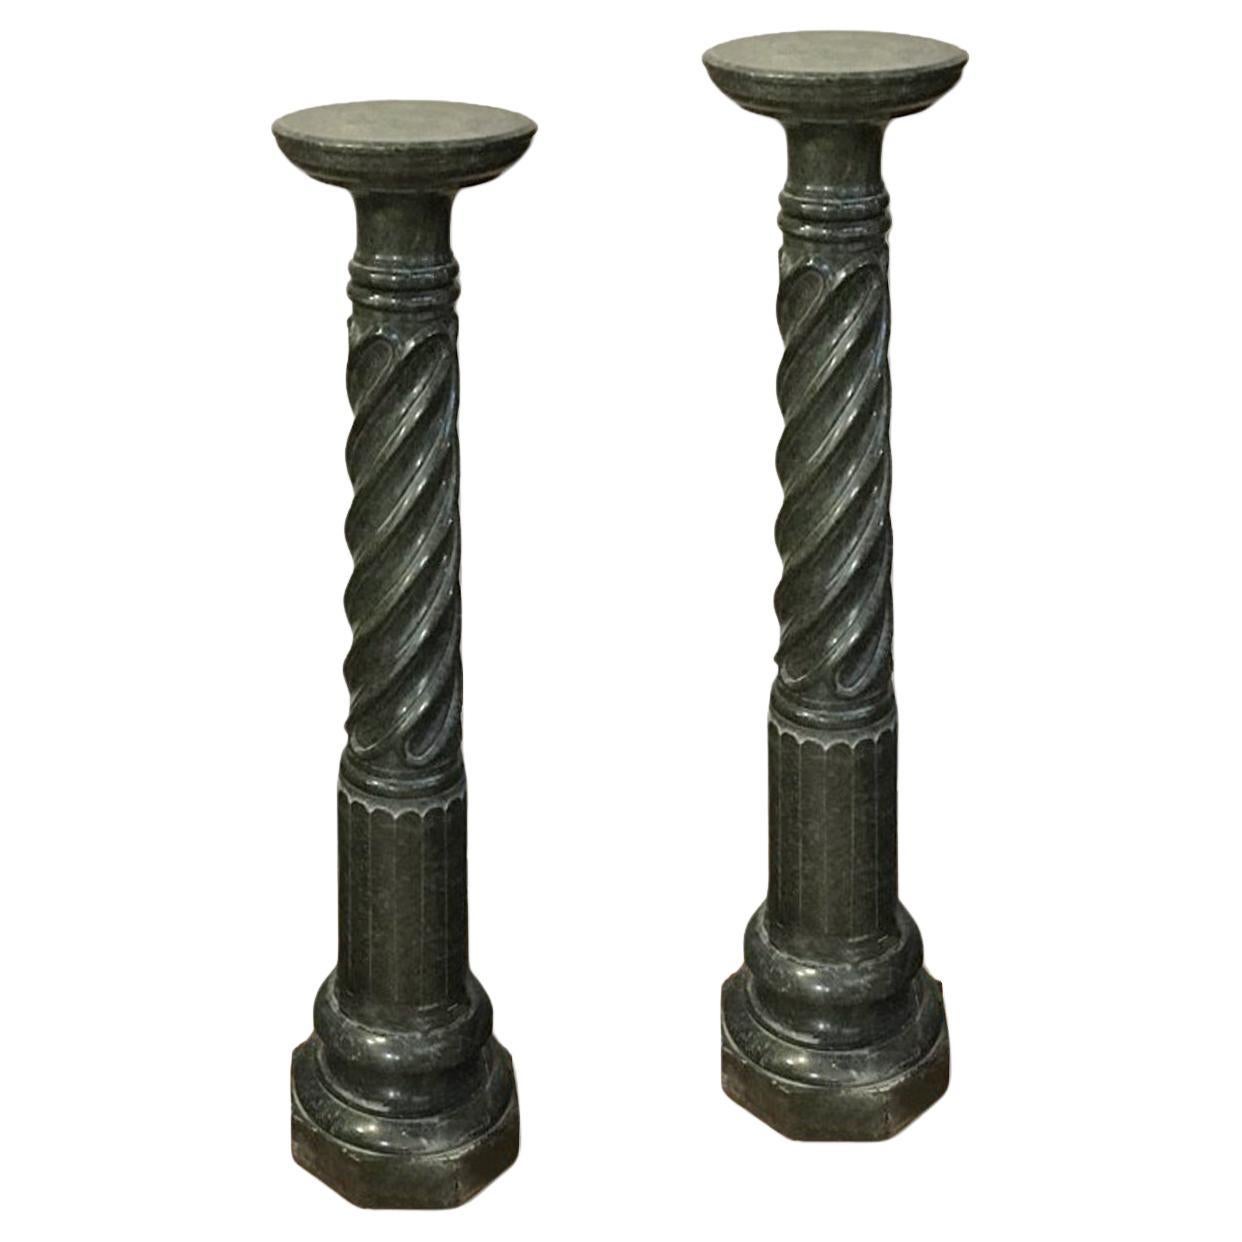 19th CENTURY PAIR OF TORCHON COLUMNS For Sale